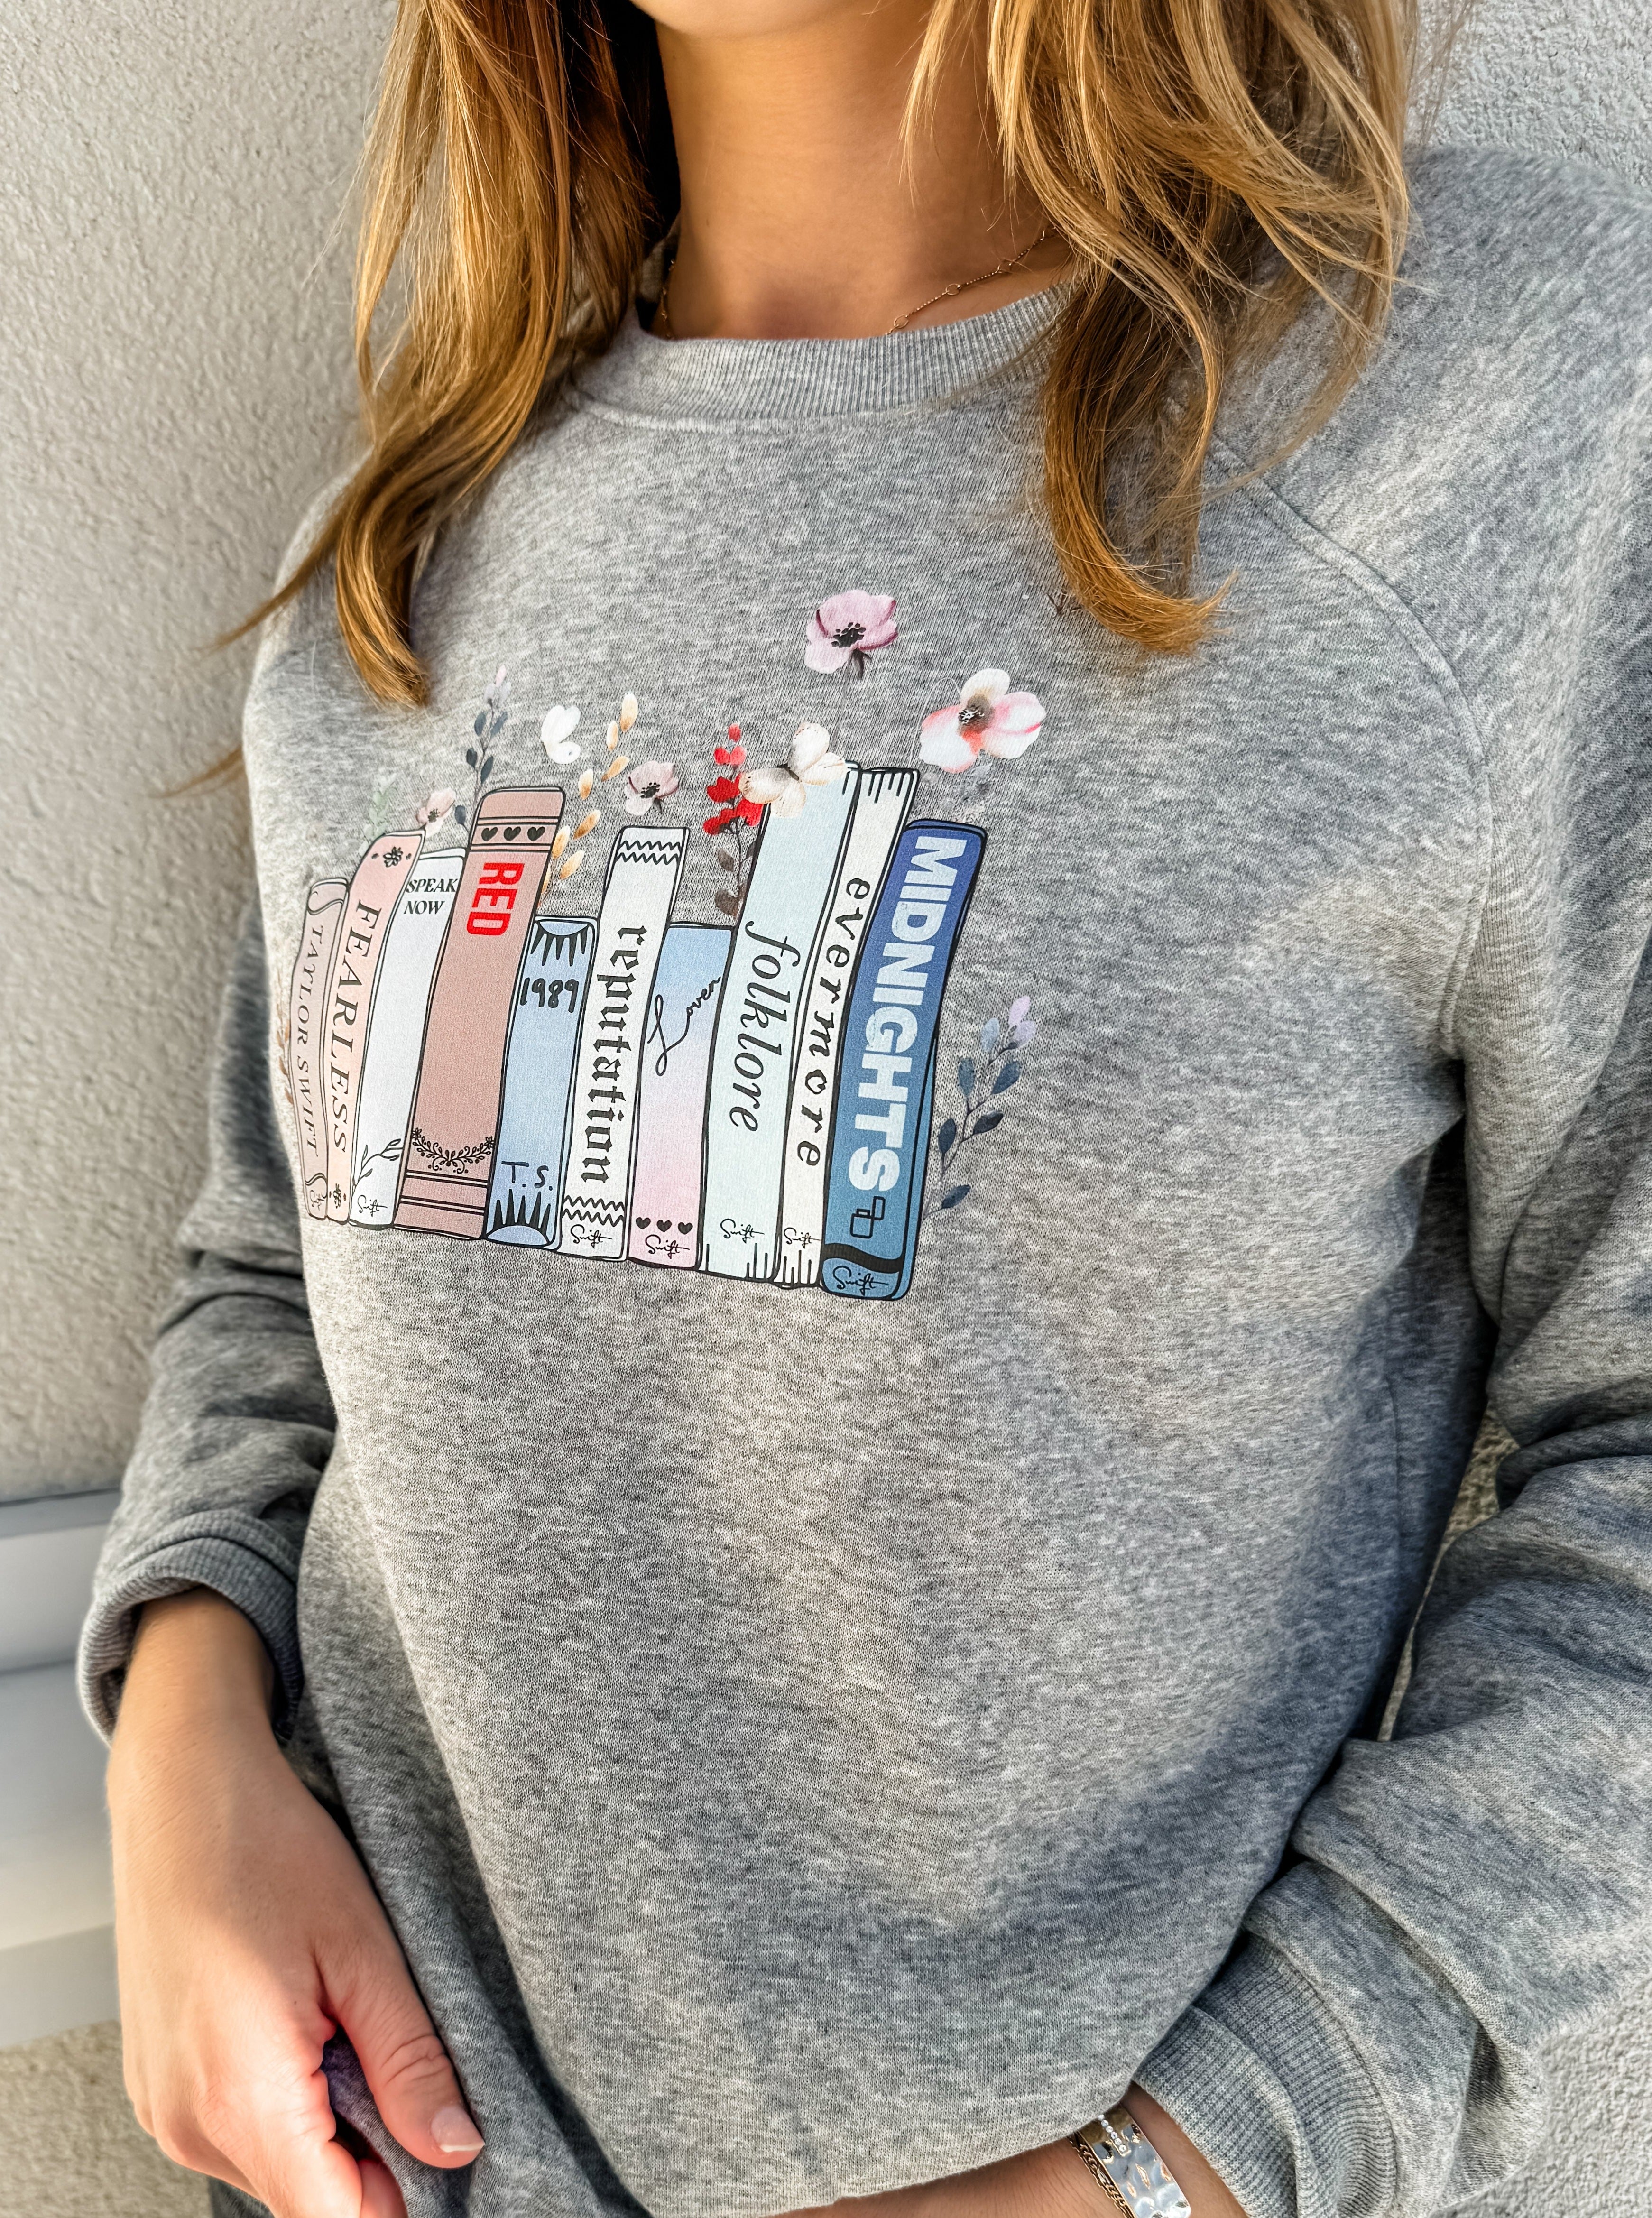 Whimsical Taylor Album Books with Flowers Sweatshirt